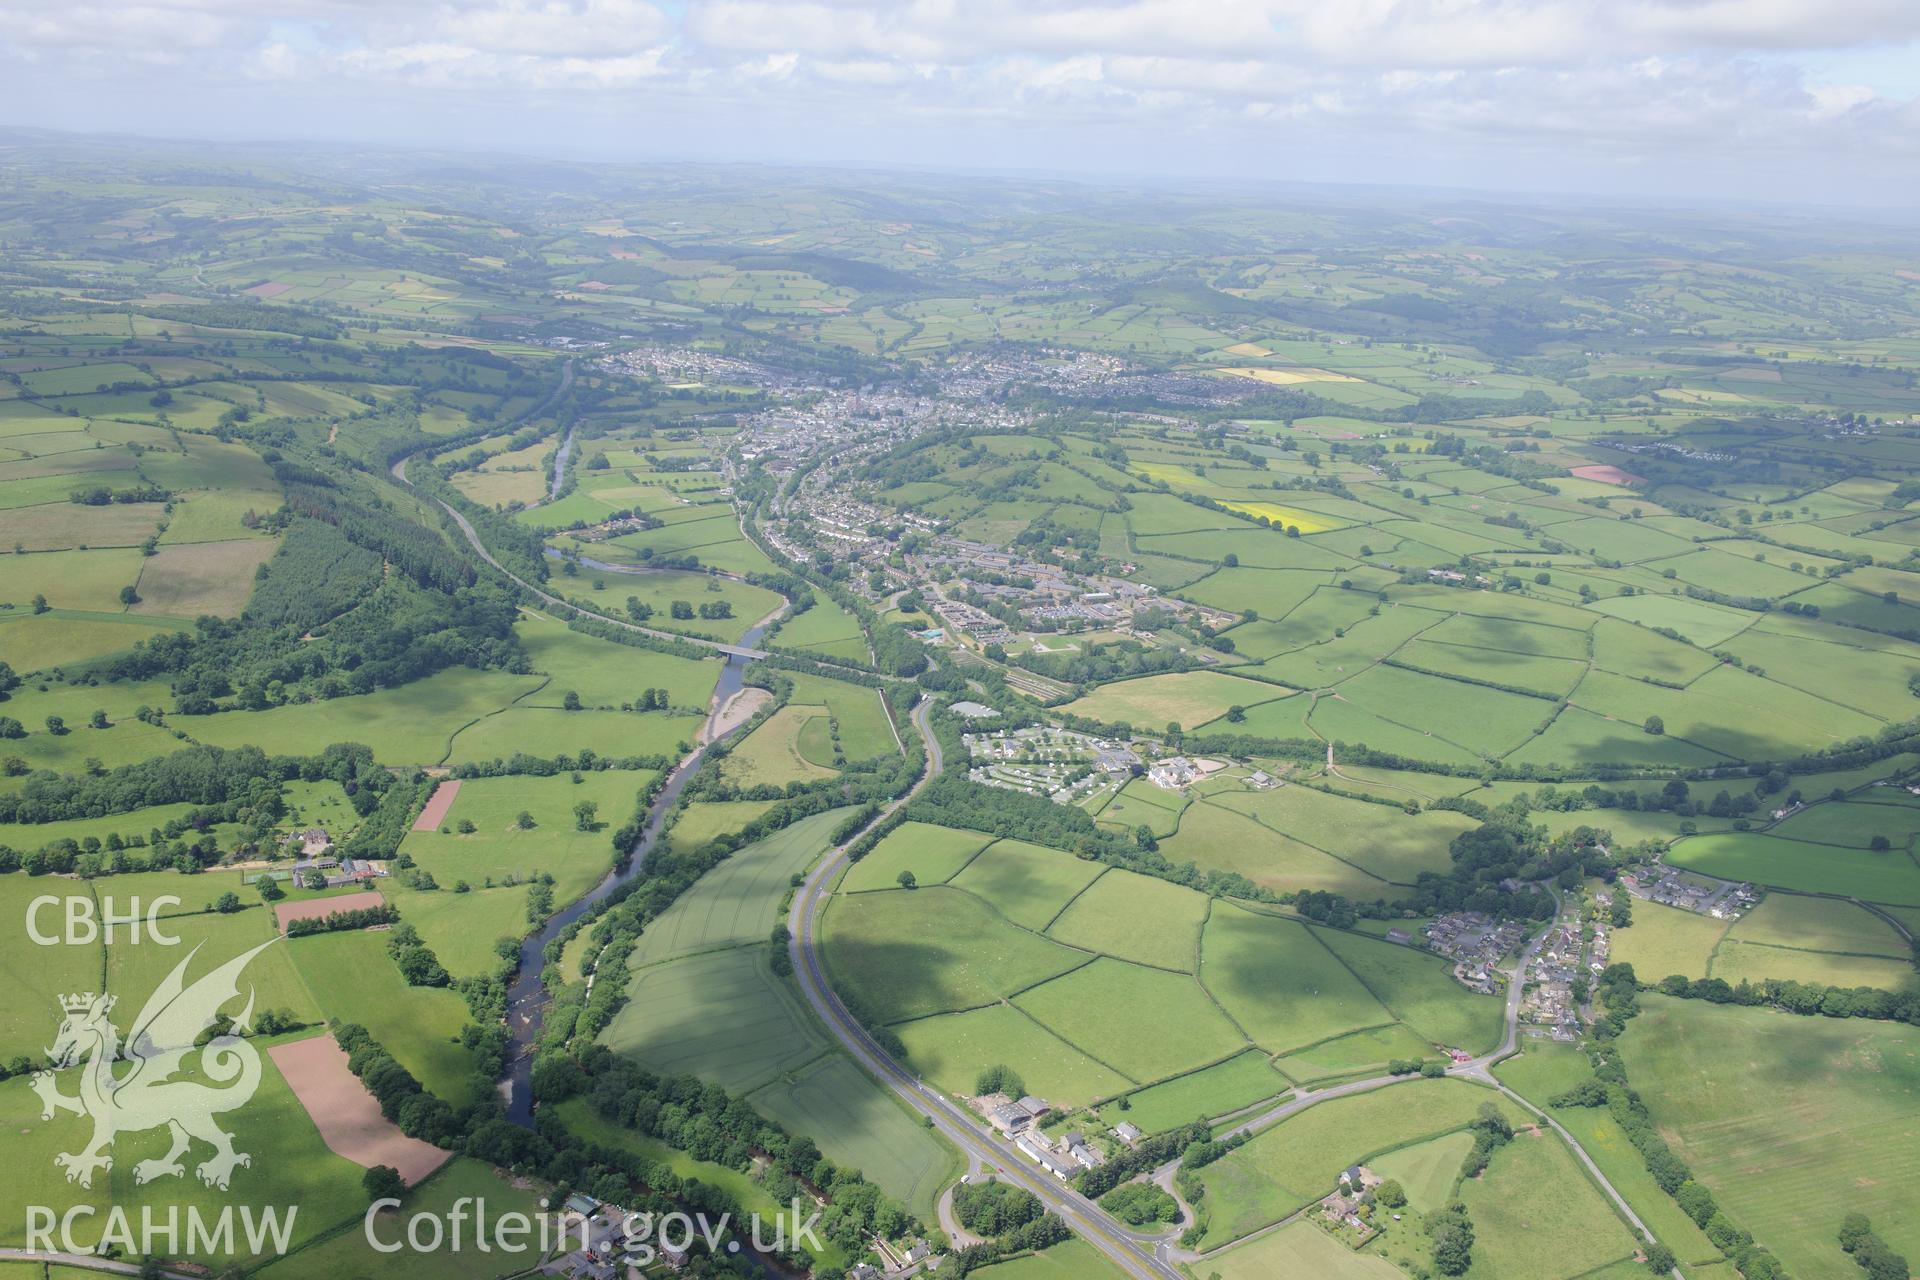 Cefn-Brynich Roman Fort, with the A40 bridge over the river Usk and the town of Brecon beyond. Oblique aerial photograph taken during the Royal Commission's programme of archaeological aerial reconnaissance by Toby Driver on 29th June 2015.